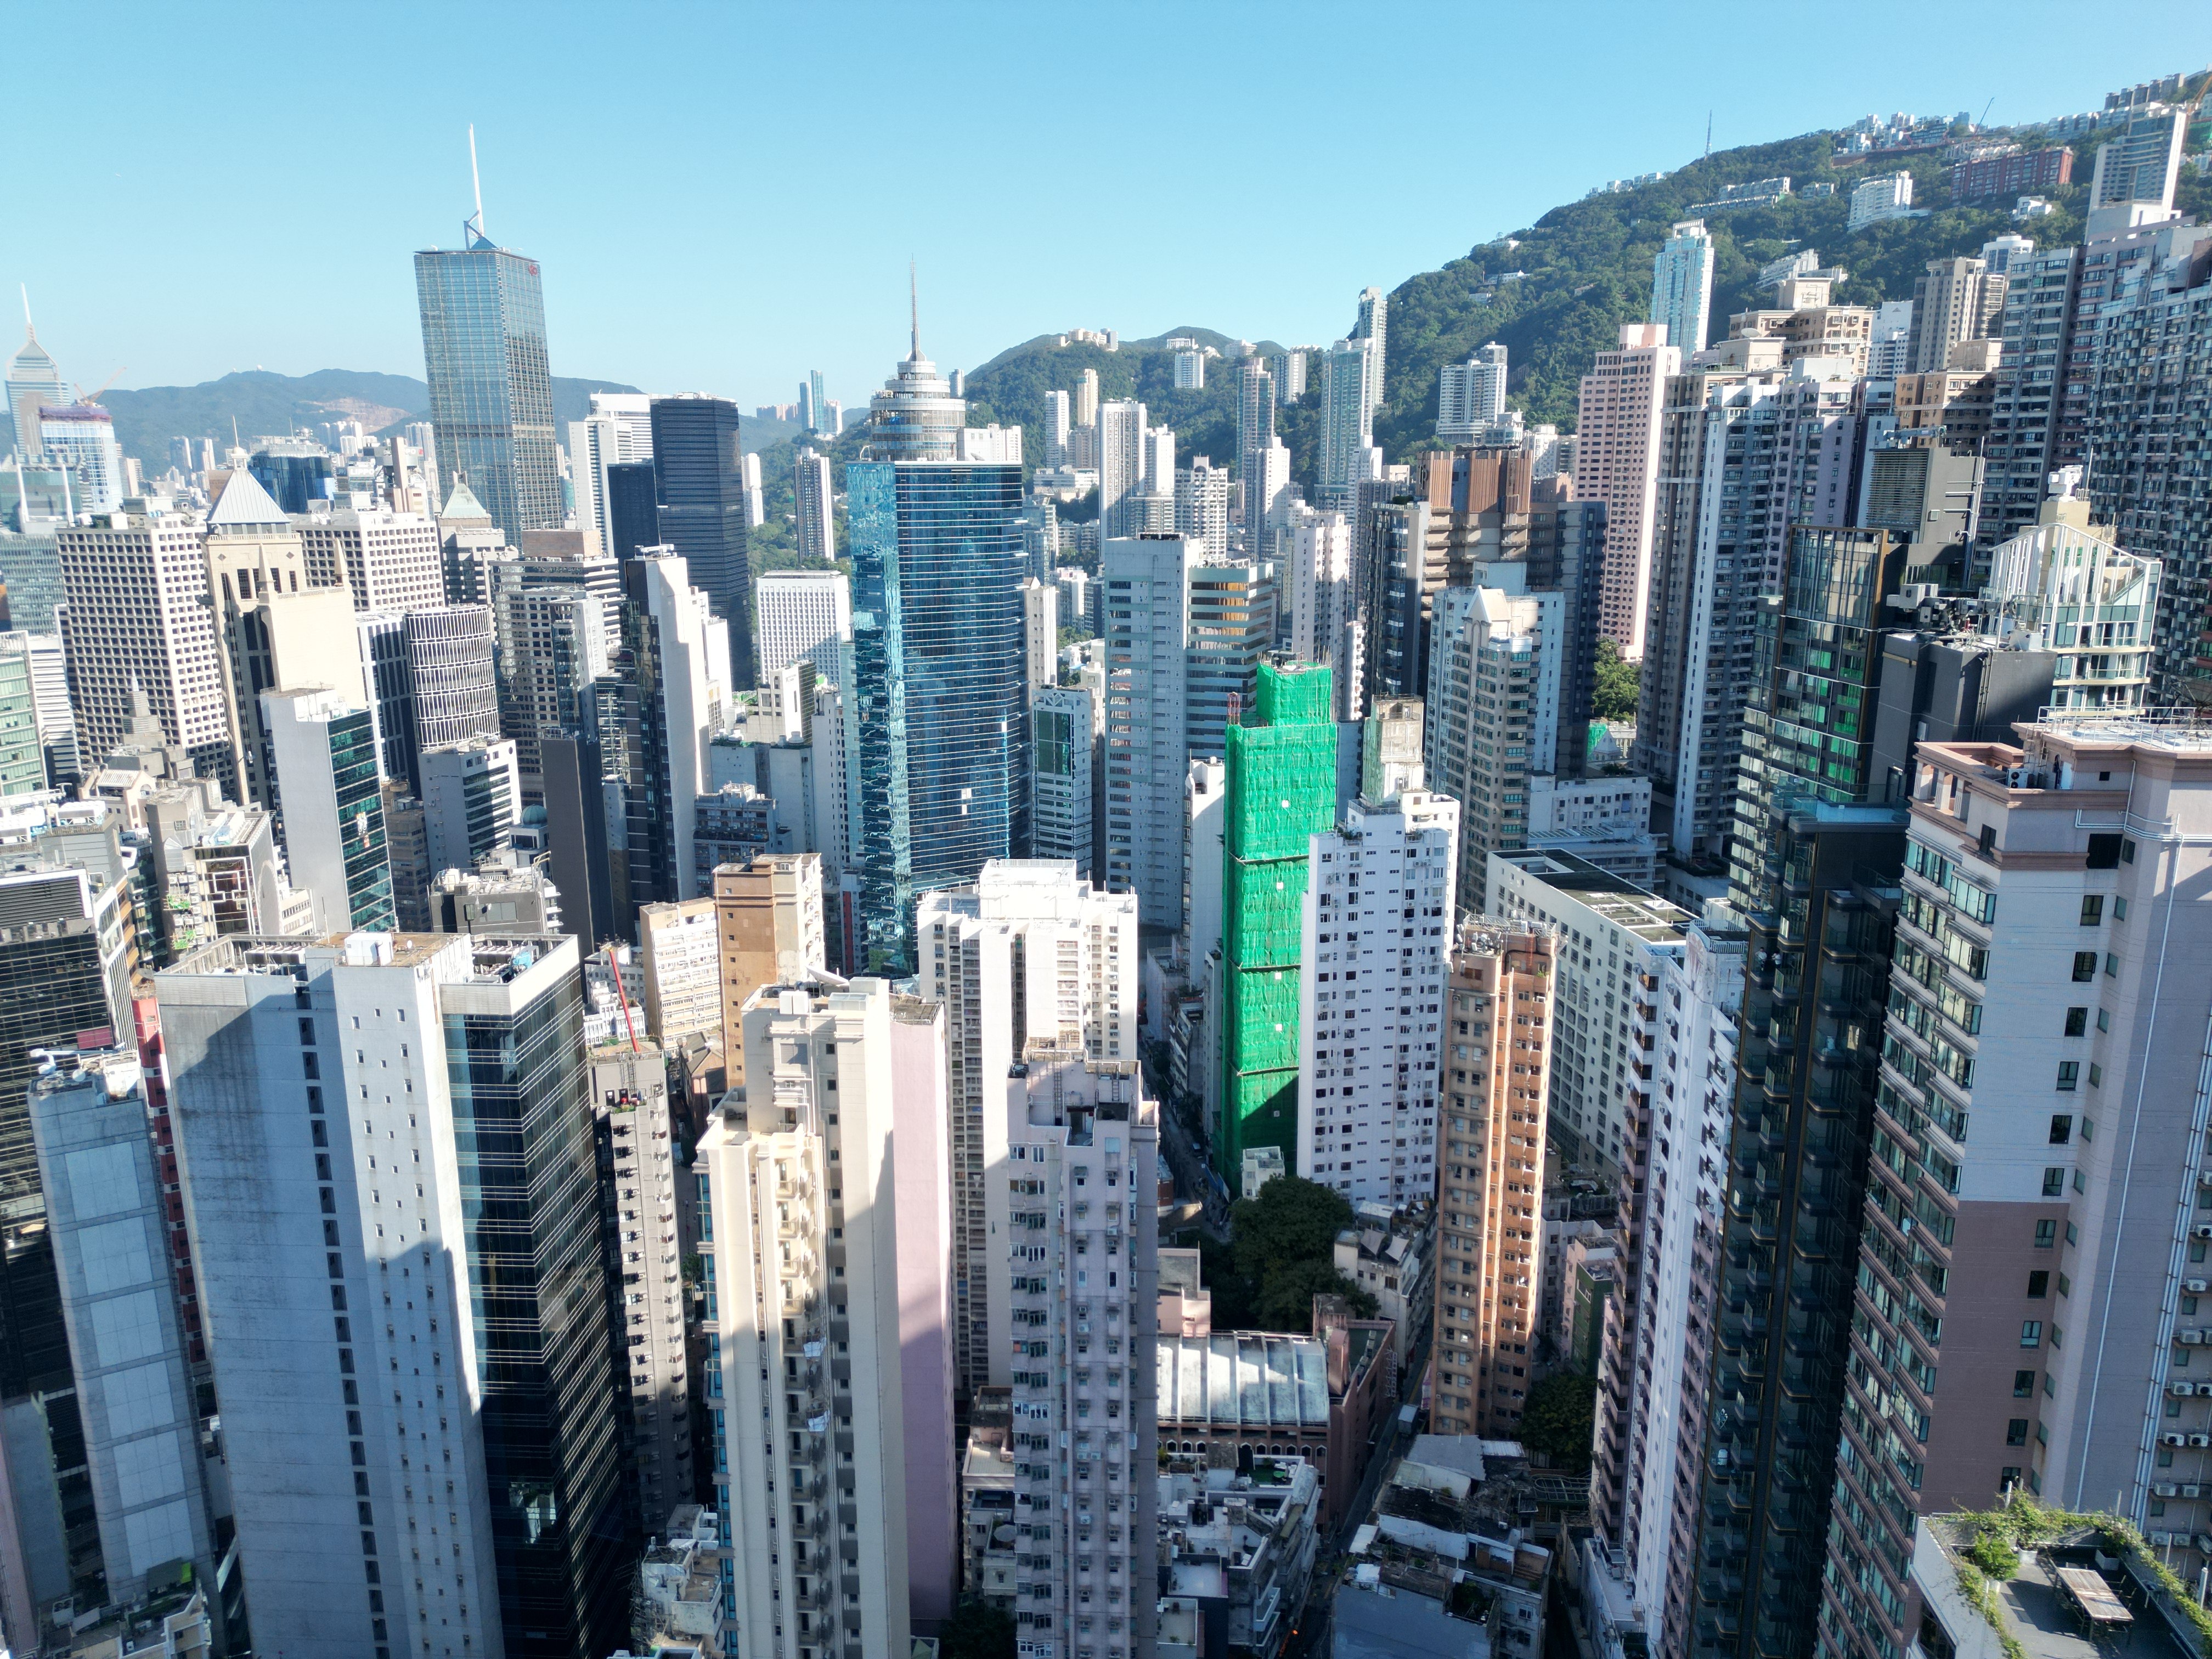 View of residential buildings in Mid-Levels, Hong Kong. Photo: May Tse